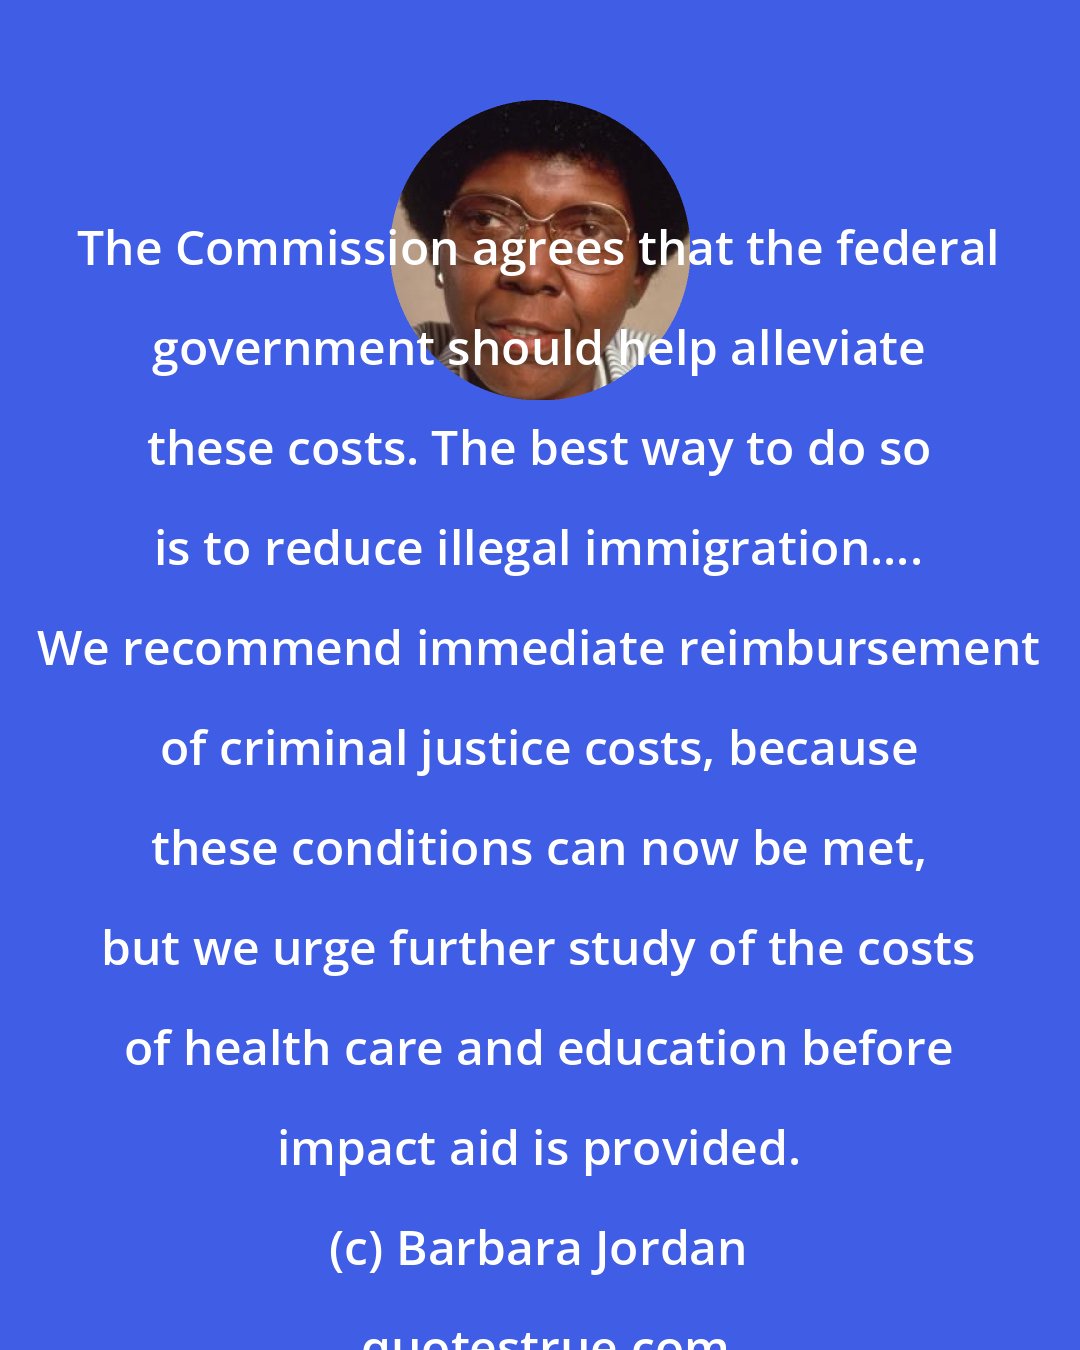 Barbara Jordan: The Commission agrees that the federal government should help alleviate these costs. The best way to do so is to reduce illegal immigration.... We recommend immediate reimbursement of criminal justice costs, because these conditions can now be met, but we urge further study of the costs of health care and education before impact aid is provided.